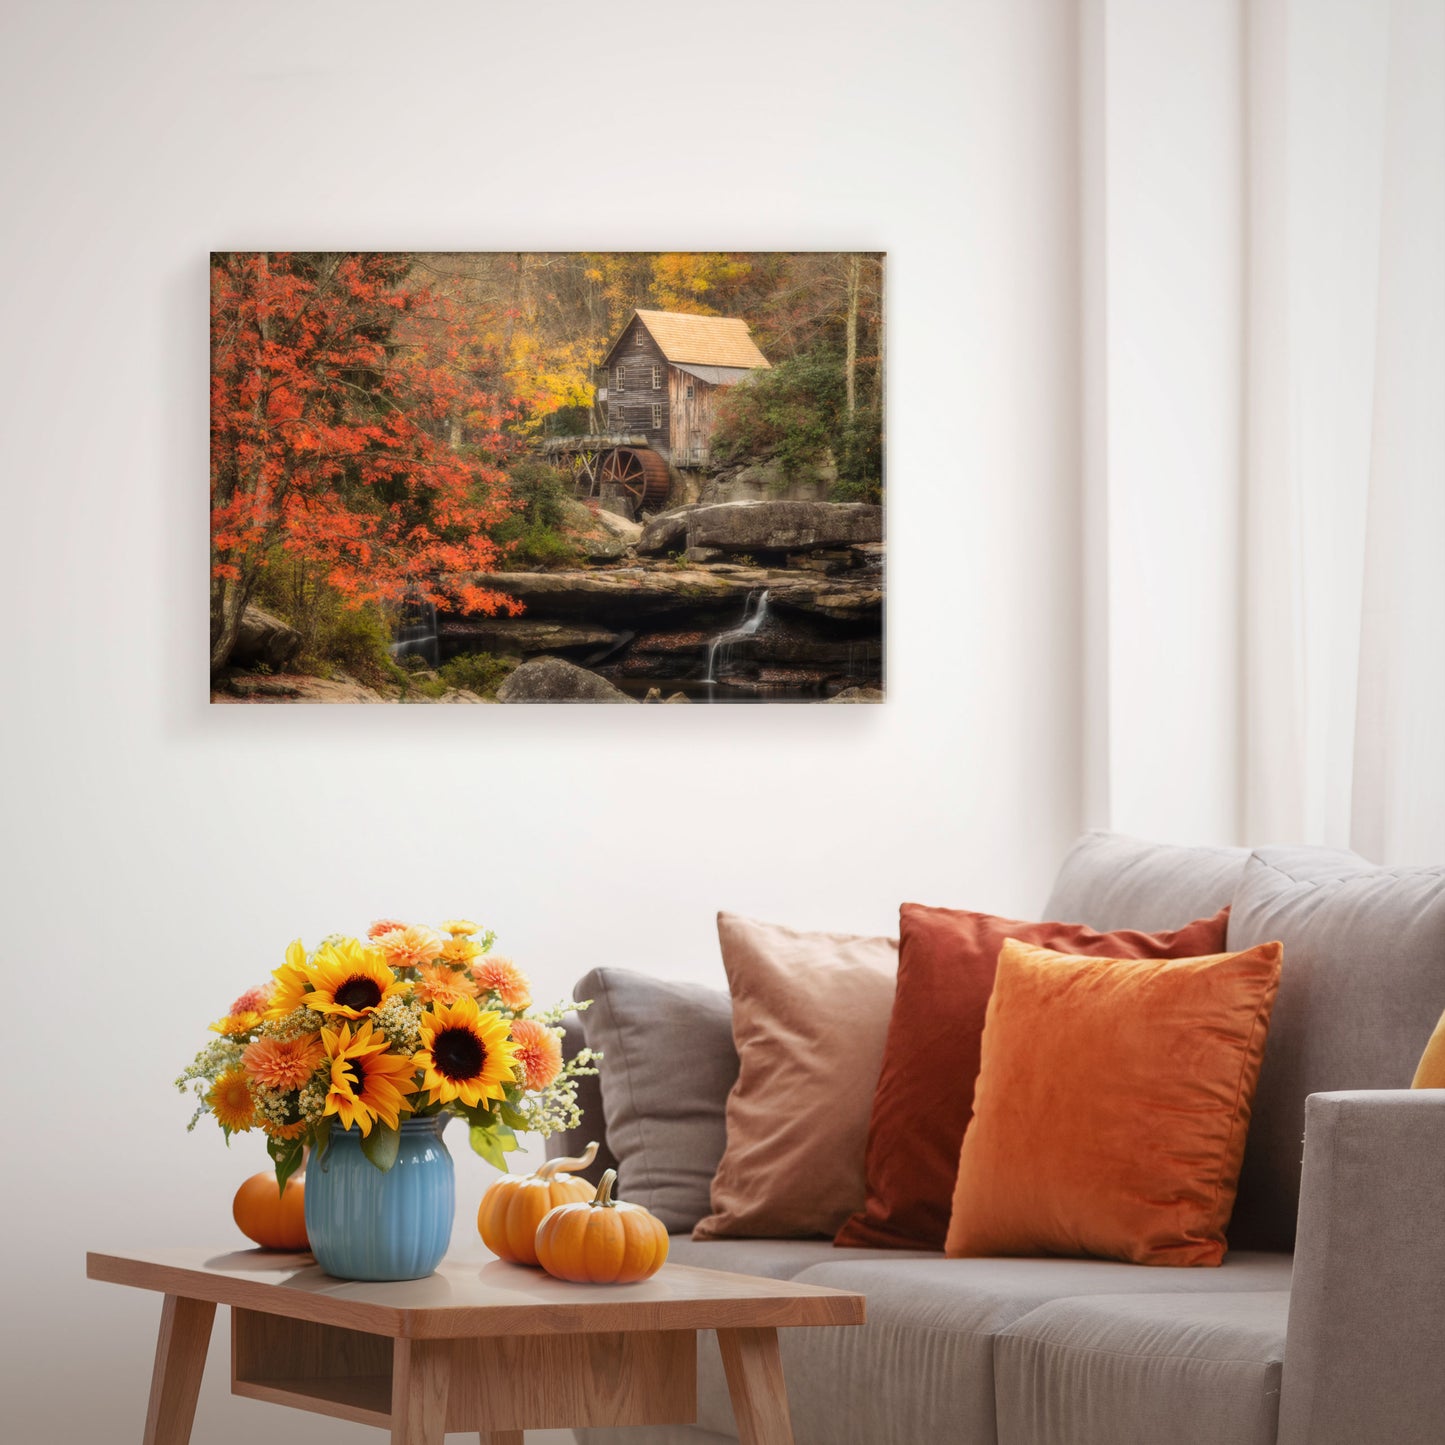 Archival quality canvas print showcasing the rustic Glade Creek Grist Mill against a backdrop of colorful fall leaves, with a sawtooth hanger for mounting.